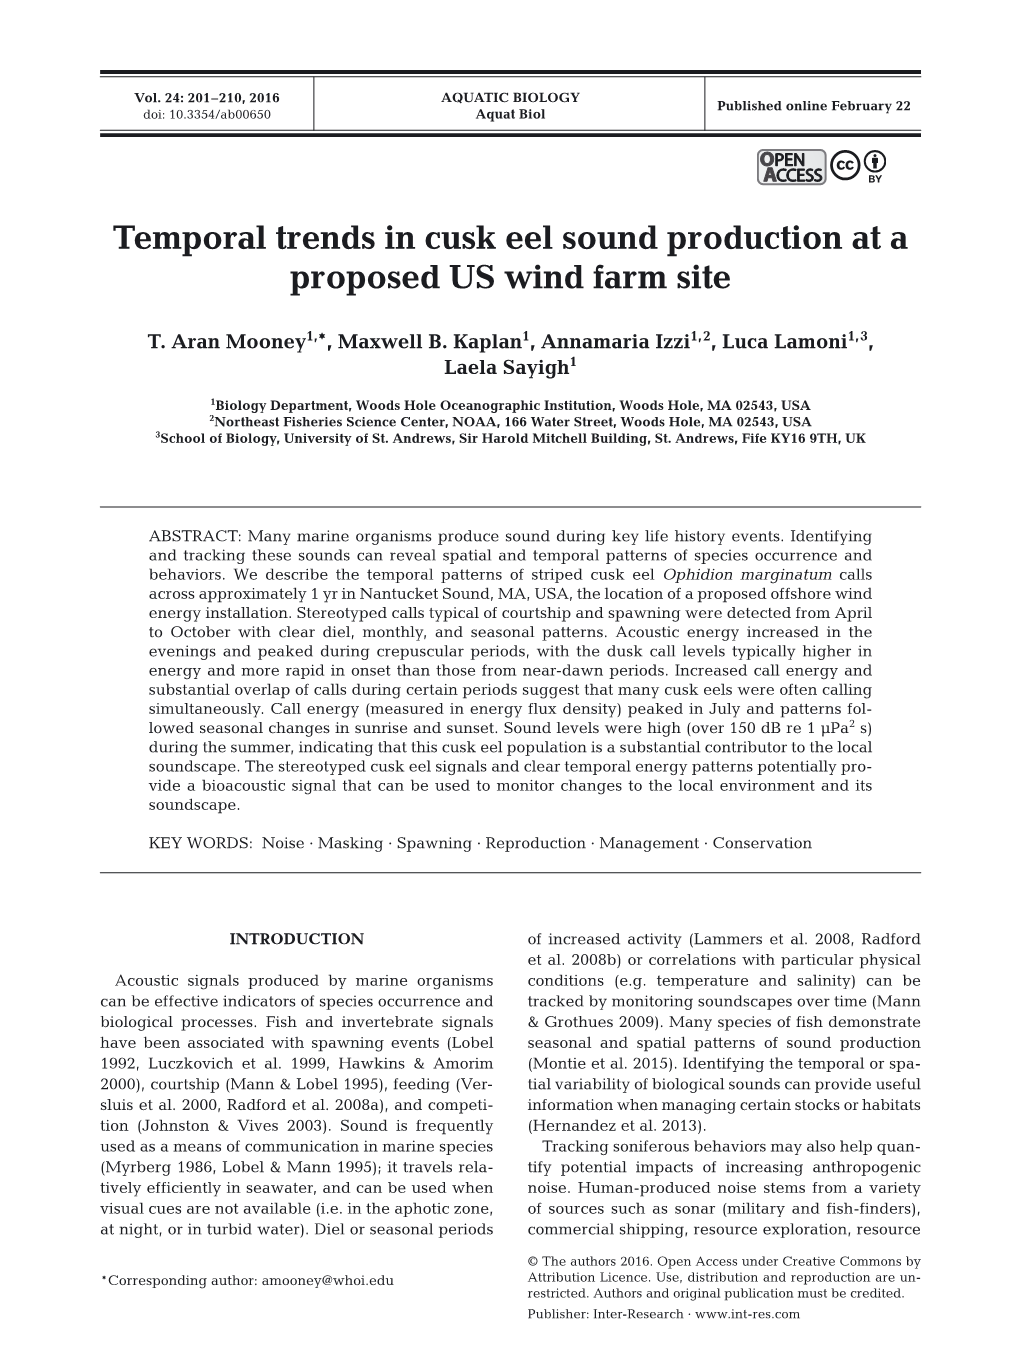 Temporal Trends in Cusk Eel Sound Production at a Proposed US Wind Farm Site